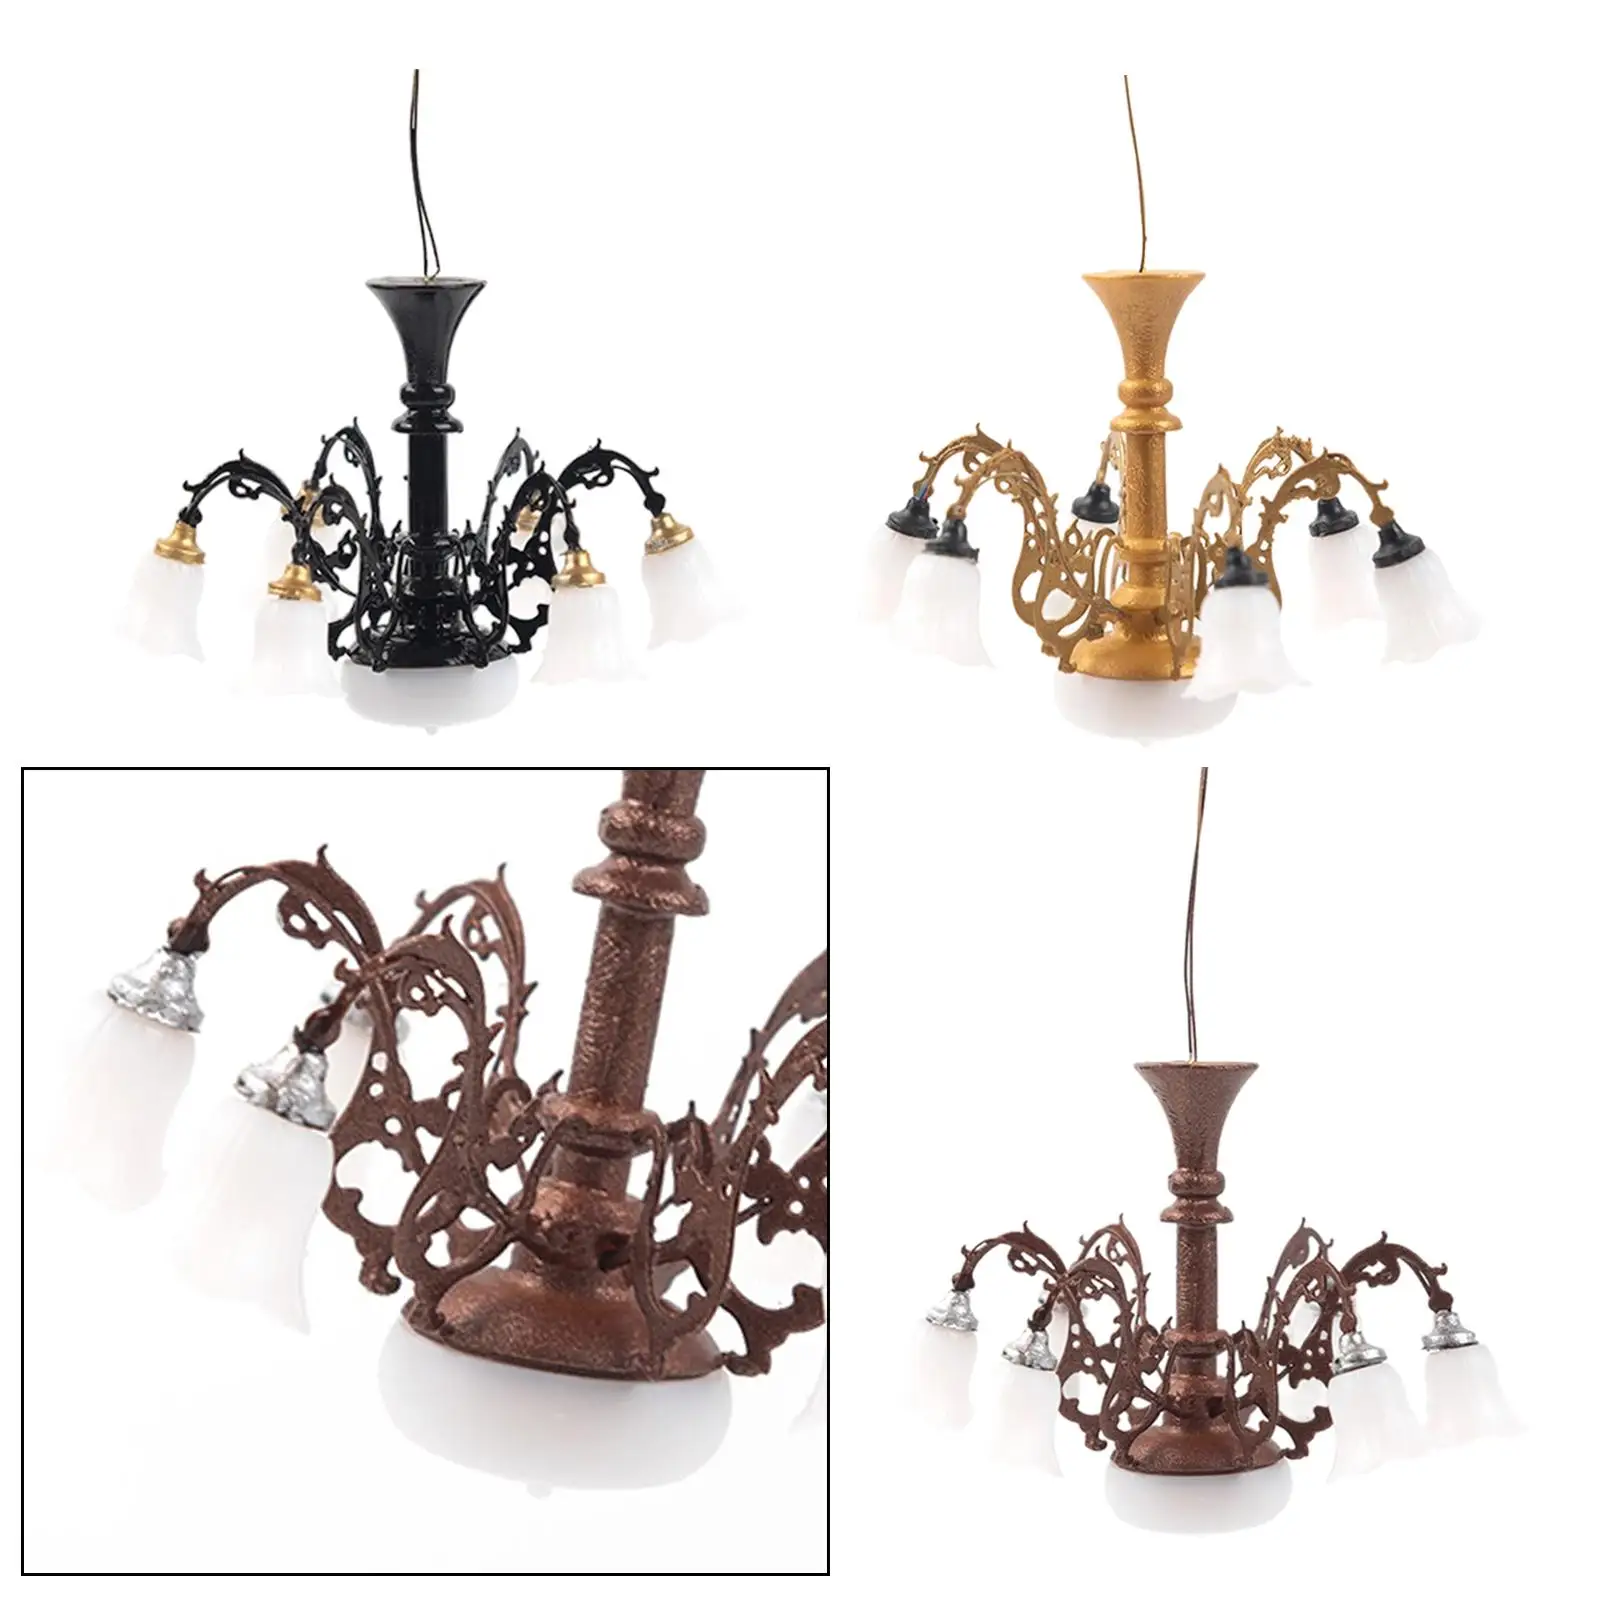 1/87 Scale Chandelier Miniature Scenes Accessory Fairy Gardens Layout Model 3V/12V HO Scale Hanging Lamp Ceiling Lamp Ornaments